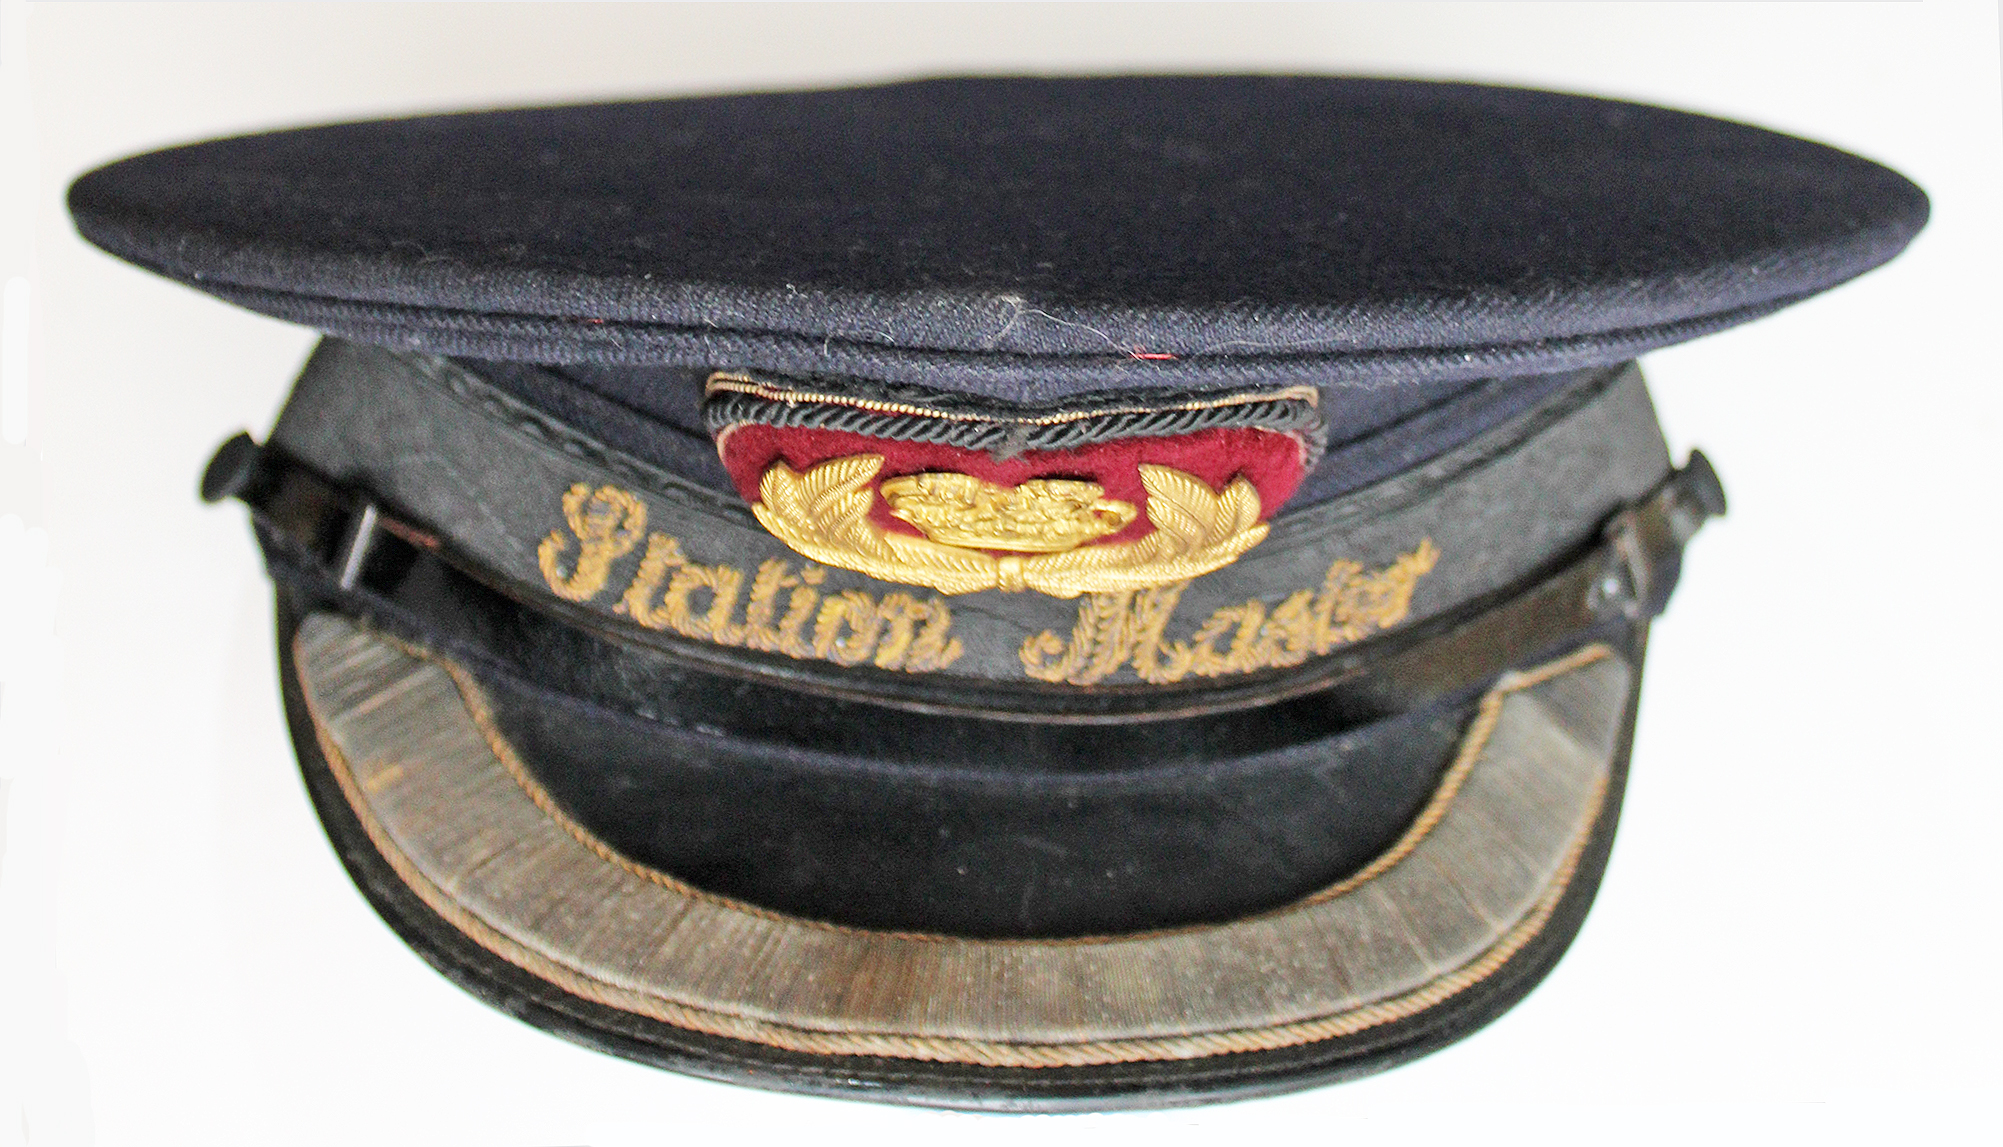 BR(M) Station Masters Hat manufactured by J Compton Sons & Webb Ltd London. No size visible. In